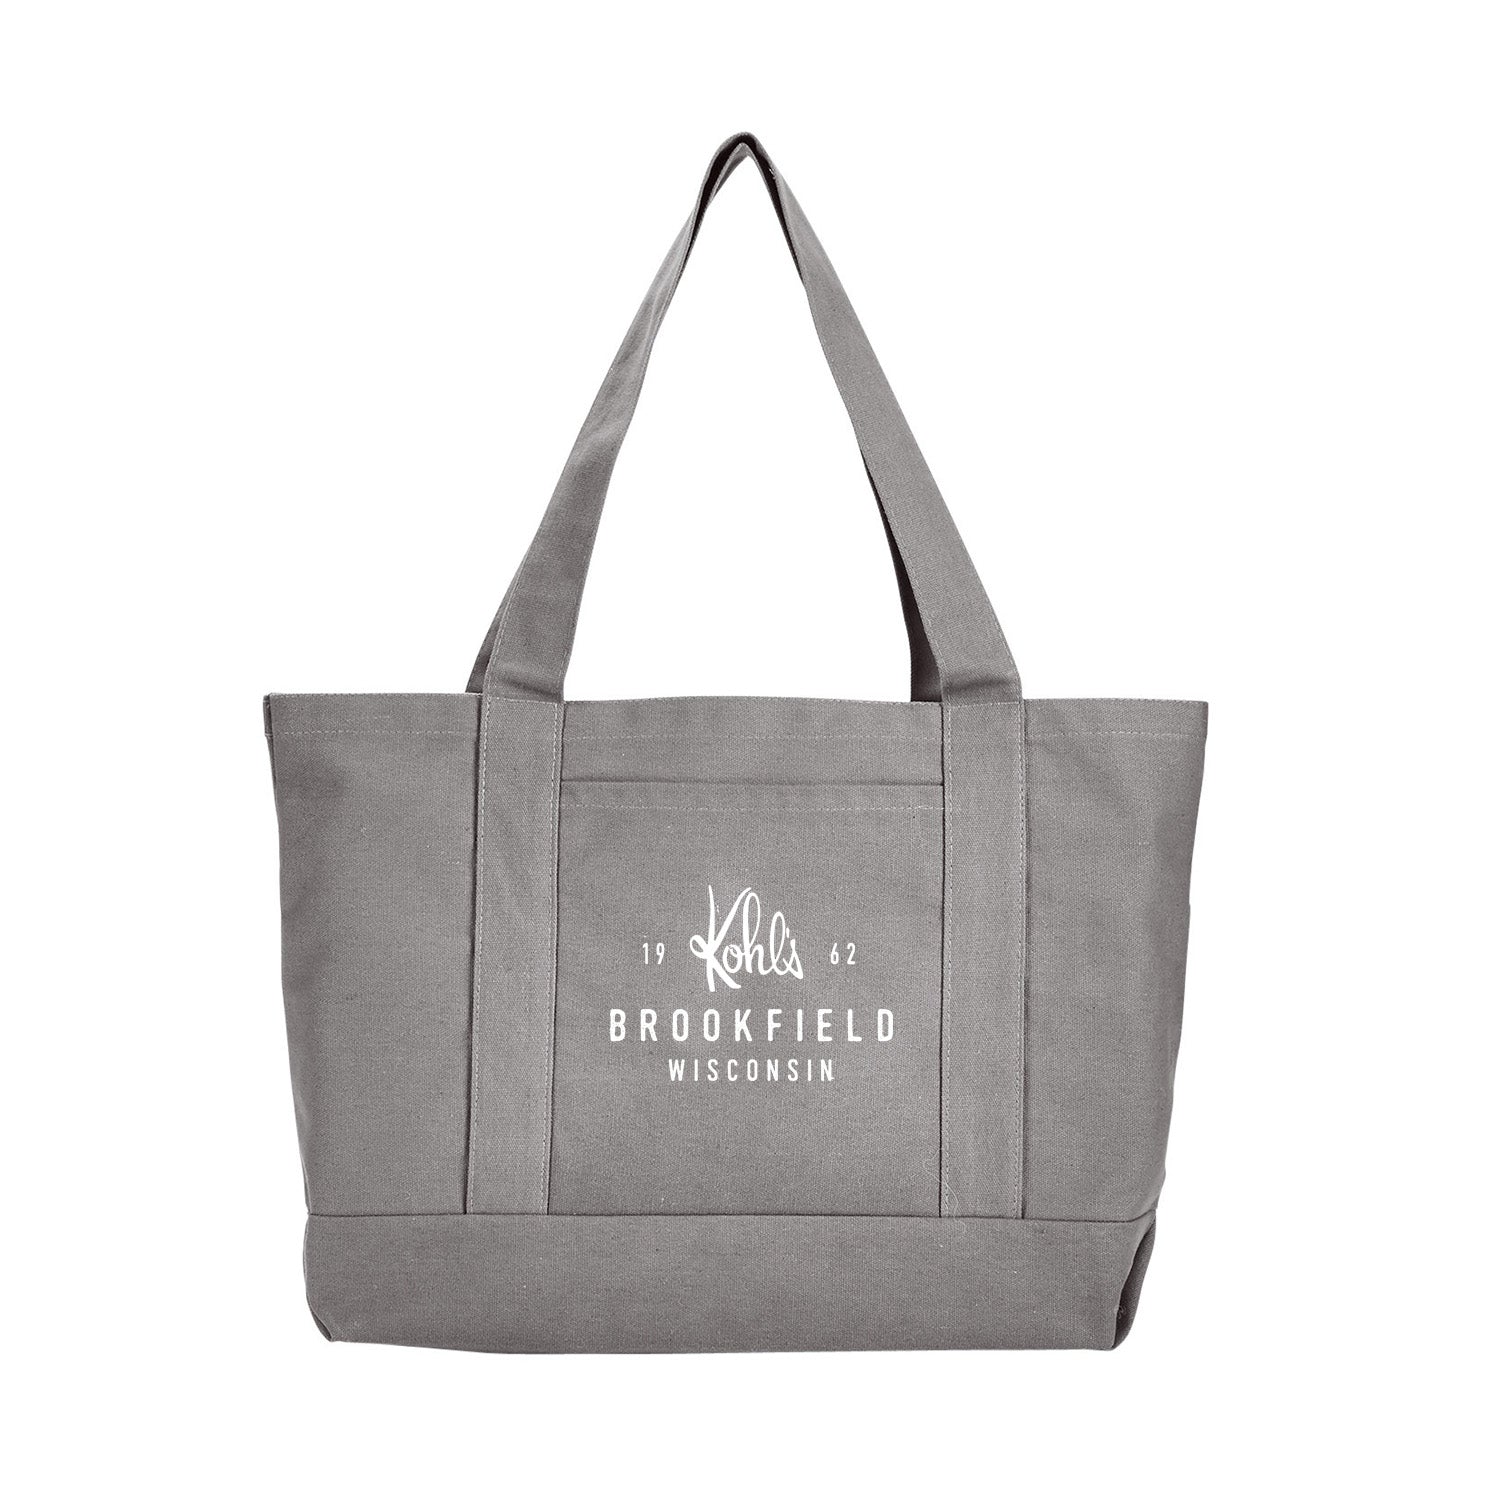 KLM TOTE WASHED GREY